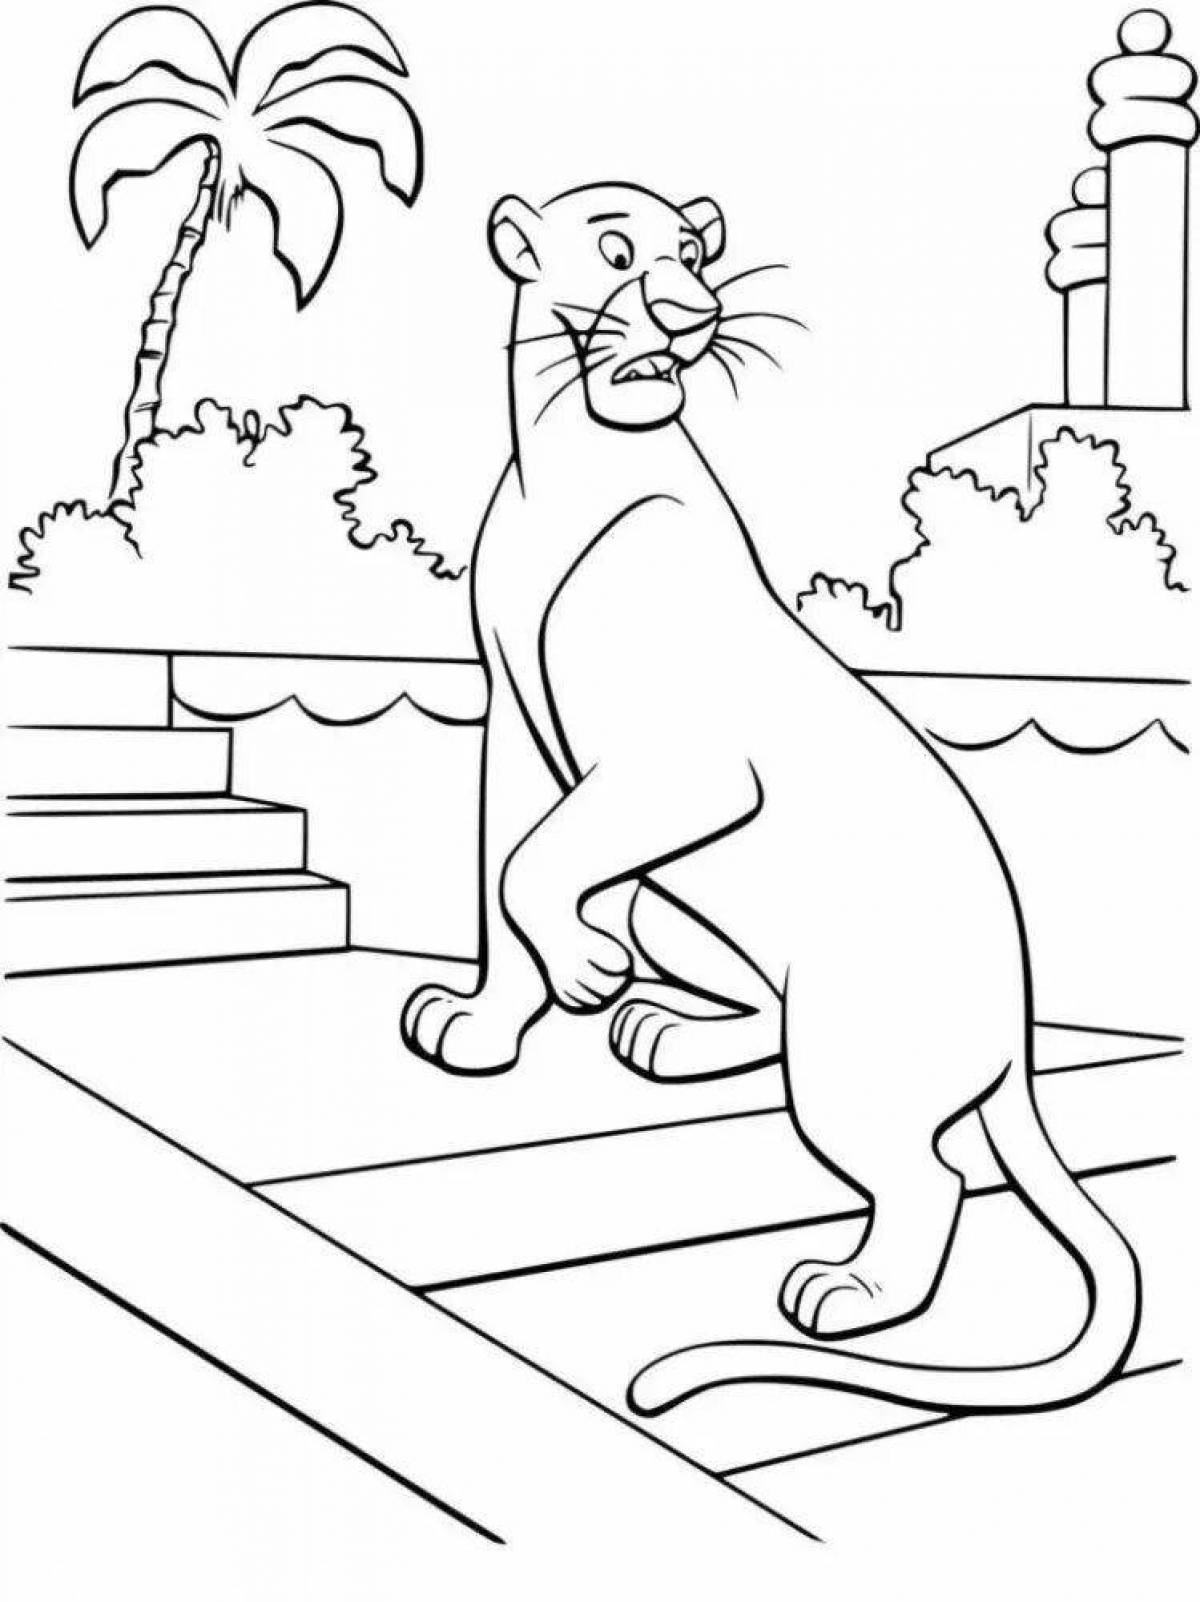 Adorable panther coloring book for kids